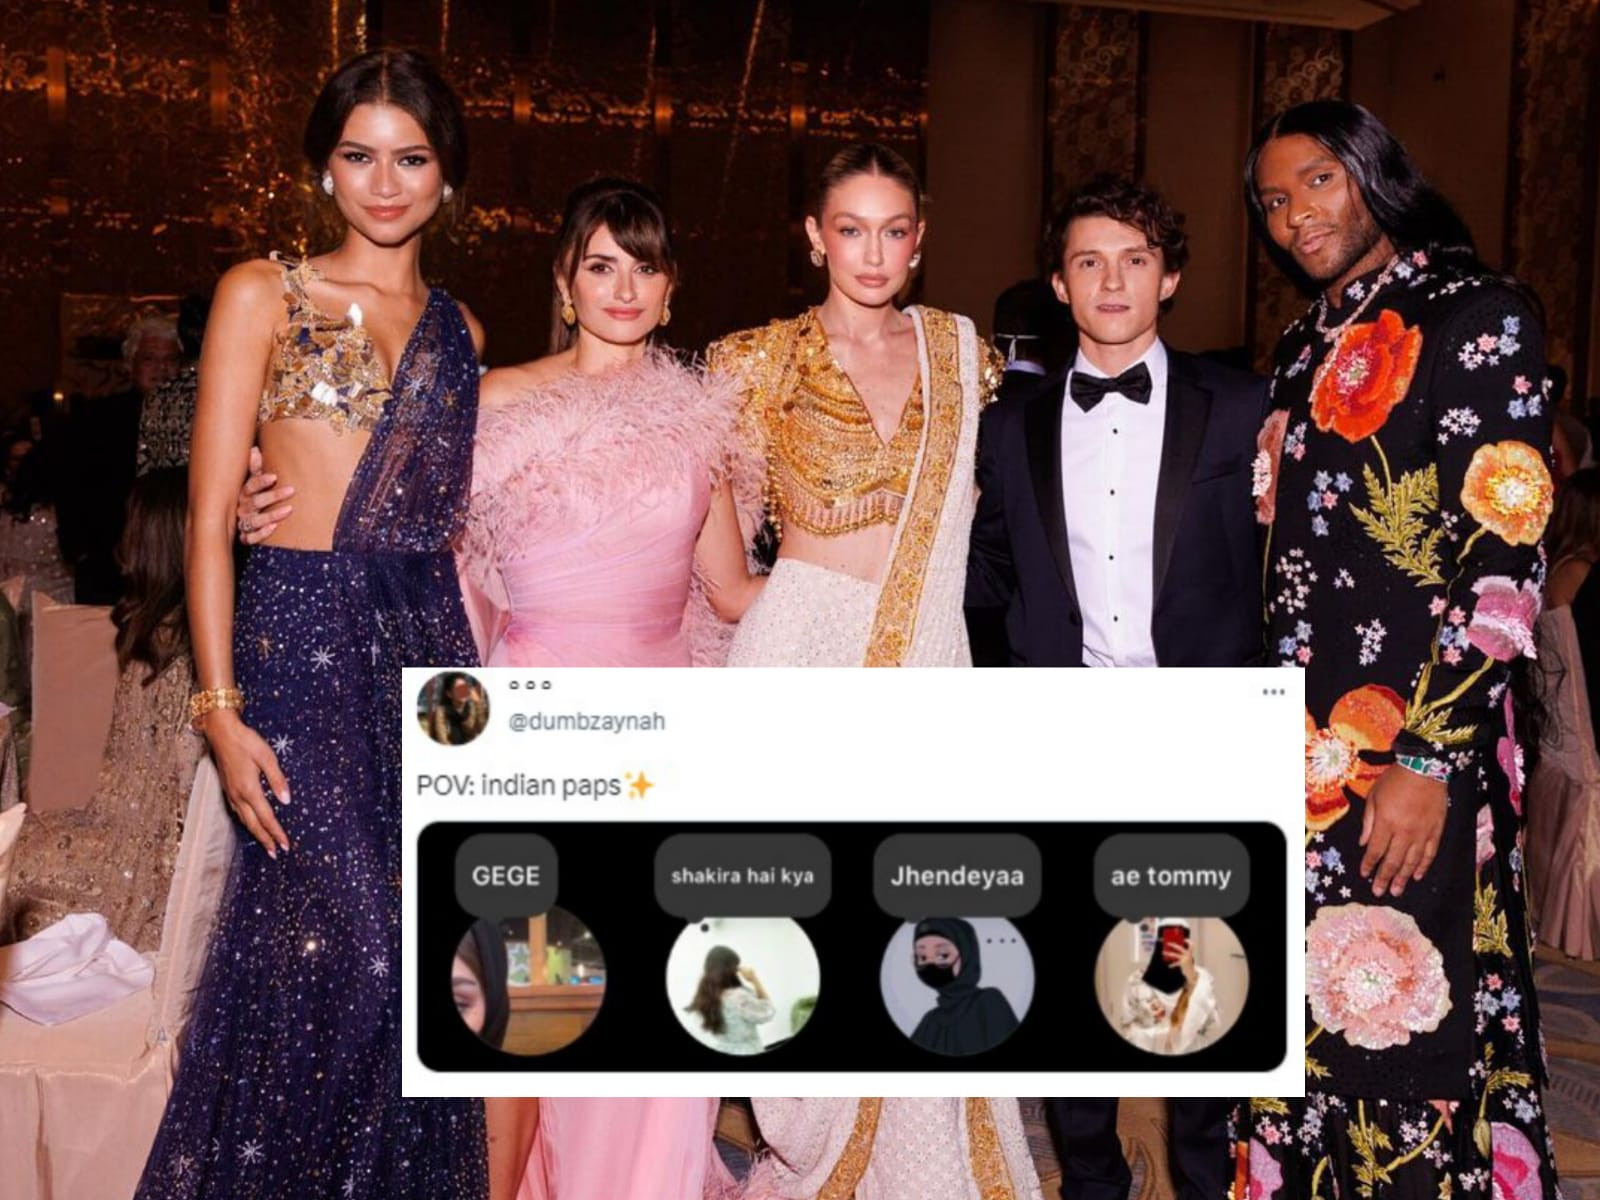 The real winner at 'Indian Met Gala' were the desi paps